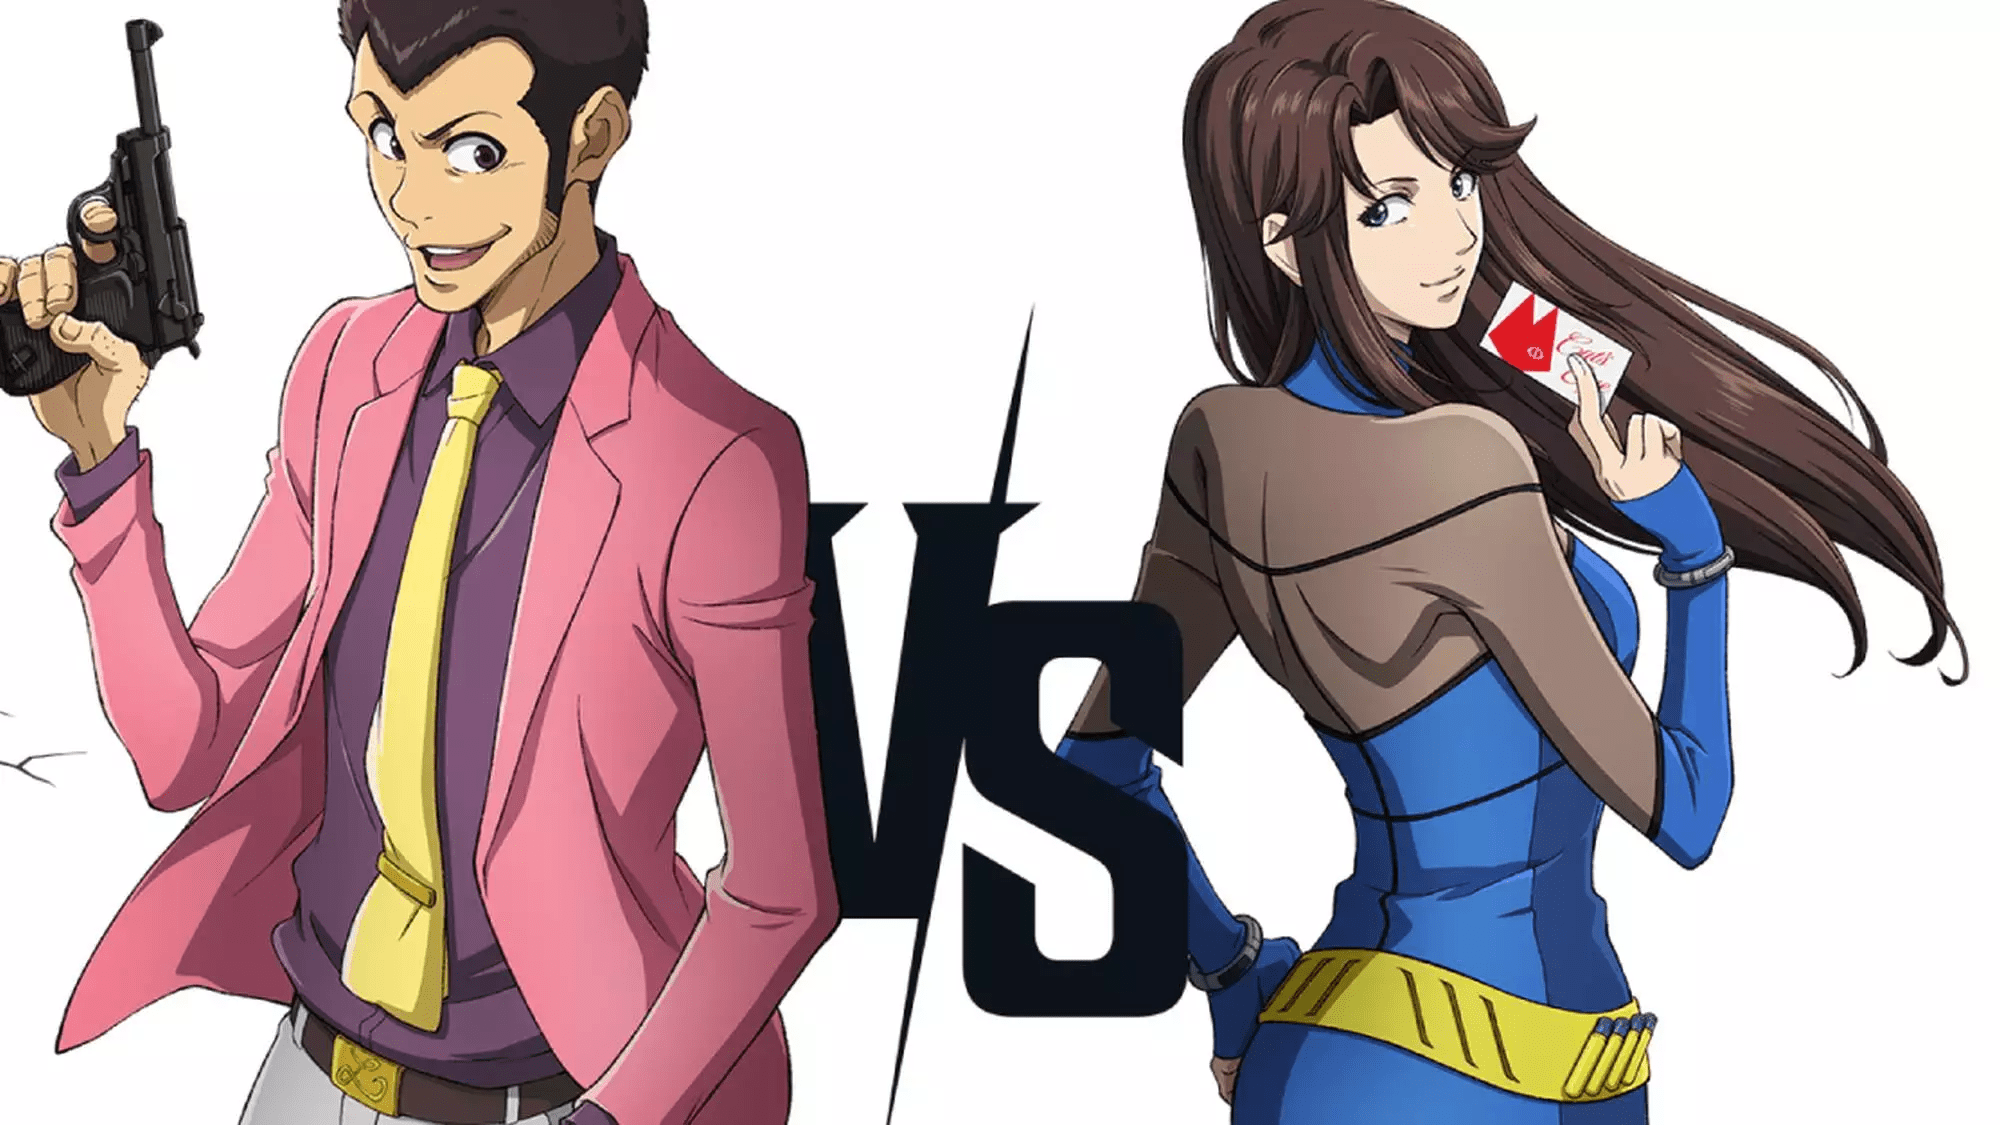 Lupin vs. Cat's Eye features thieves with hearts of gold